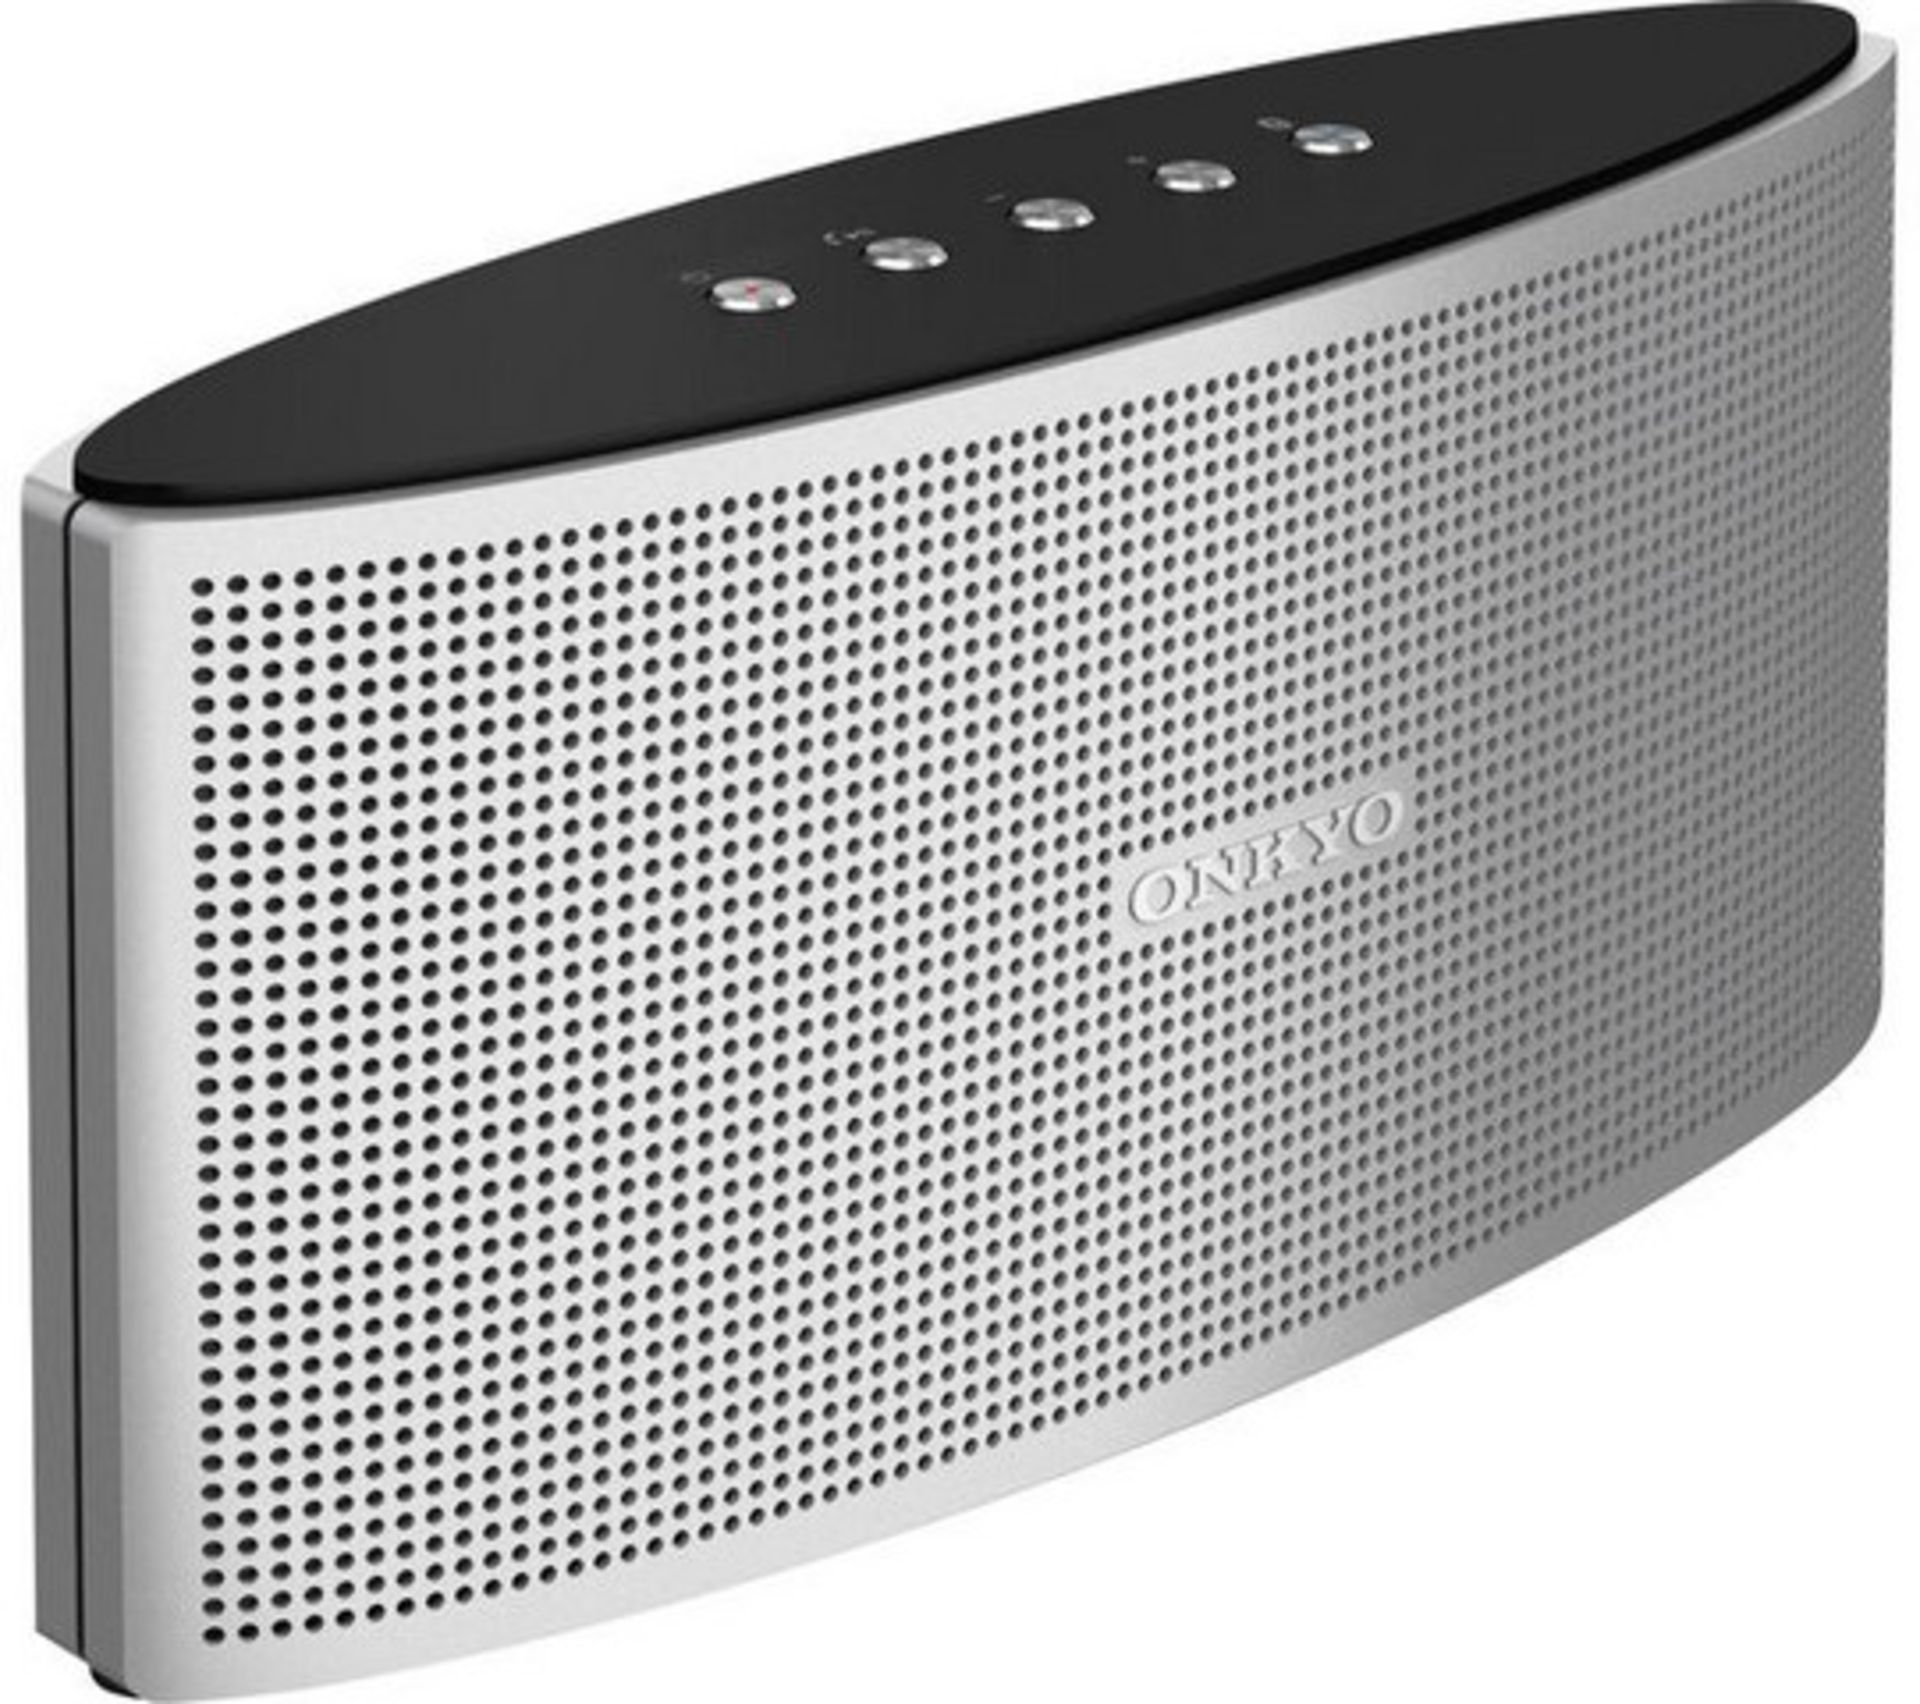 V Brand New Onkyo X3 Portable Bluetooth Speaker With Playback - Multiple Pairing - Michrophone - - Image 2 of 2